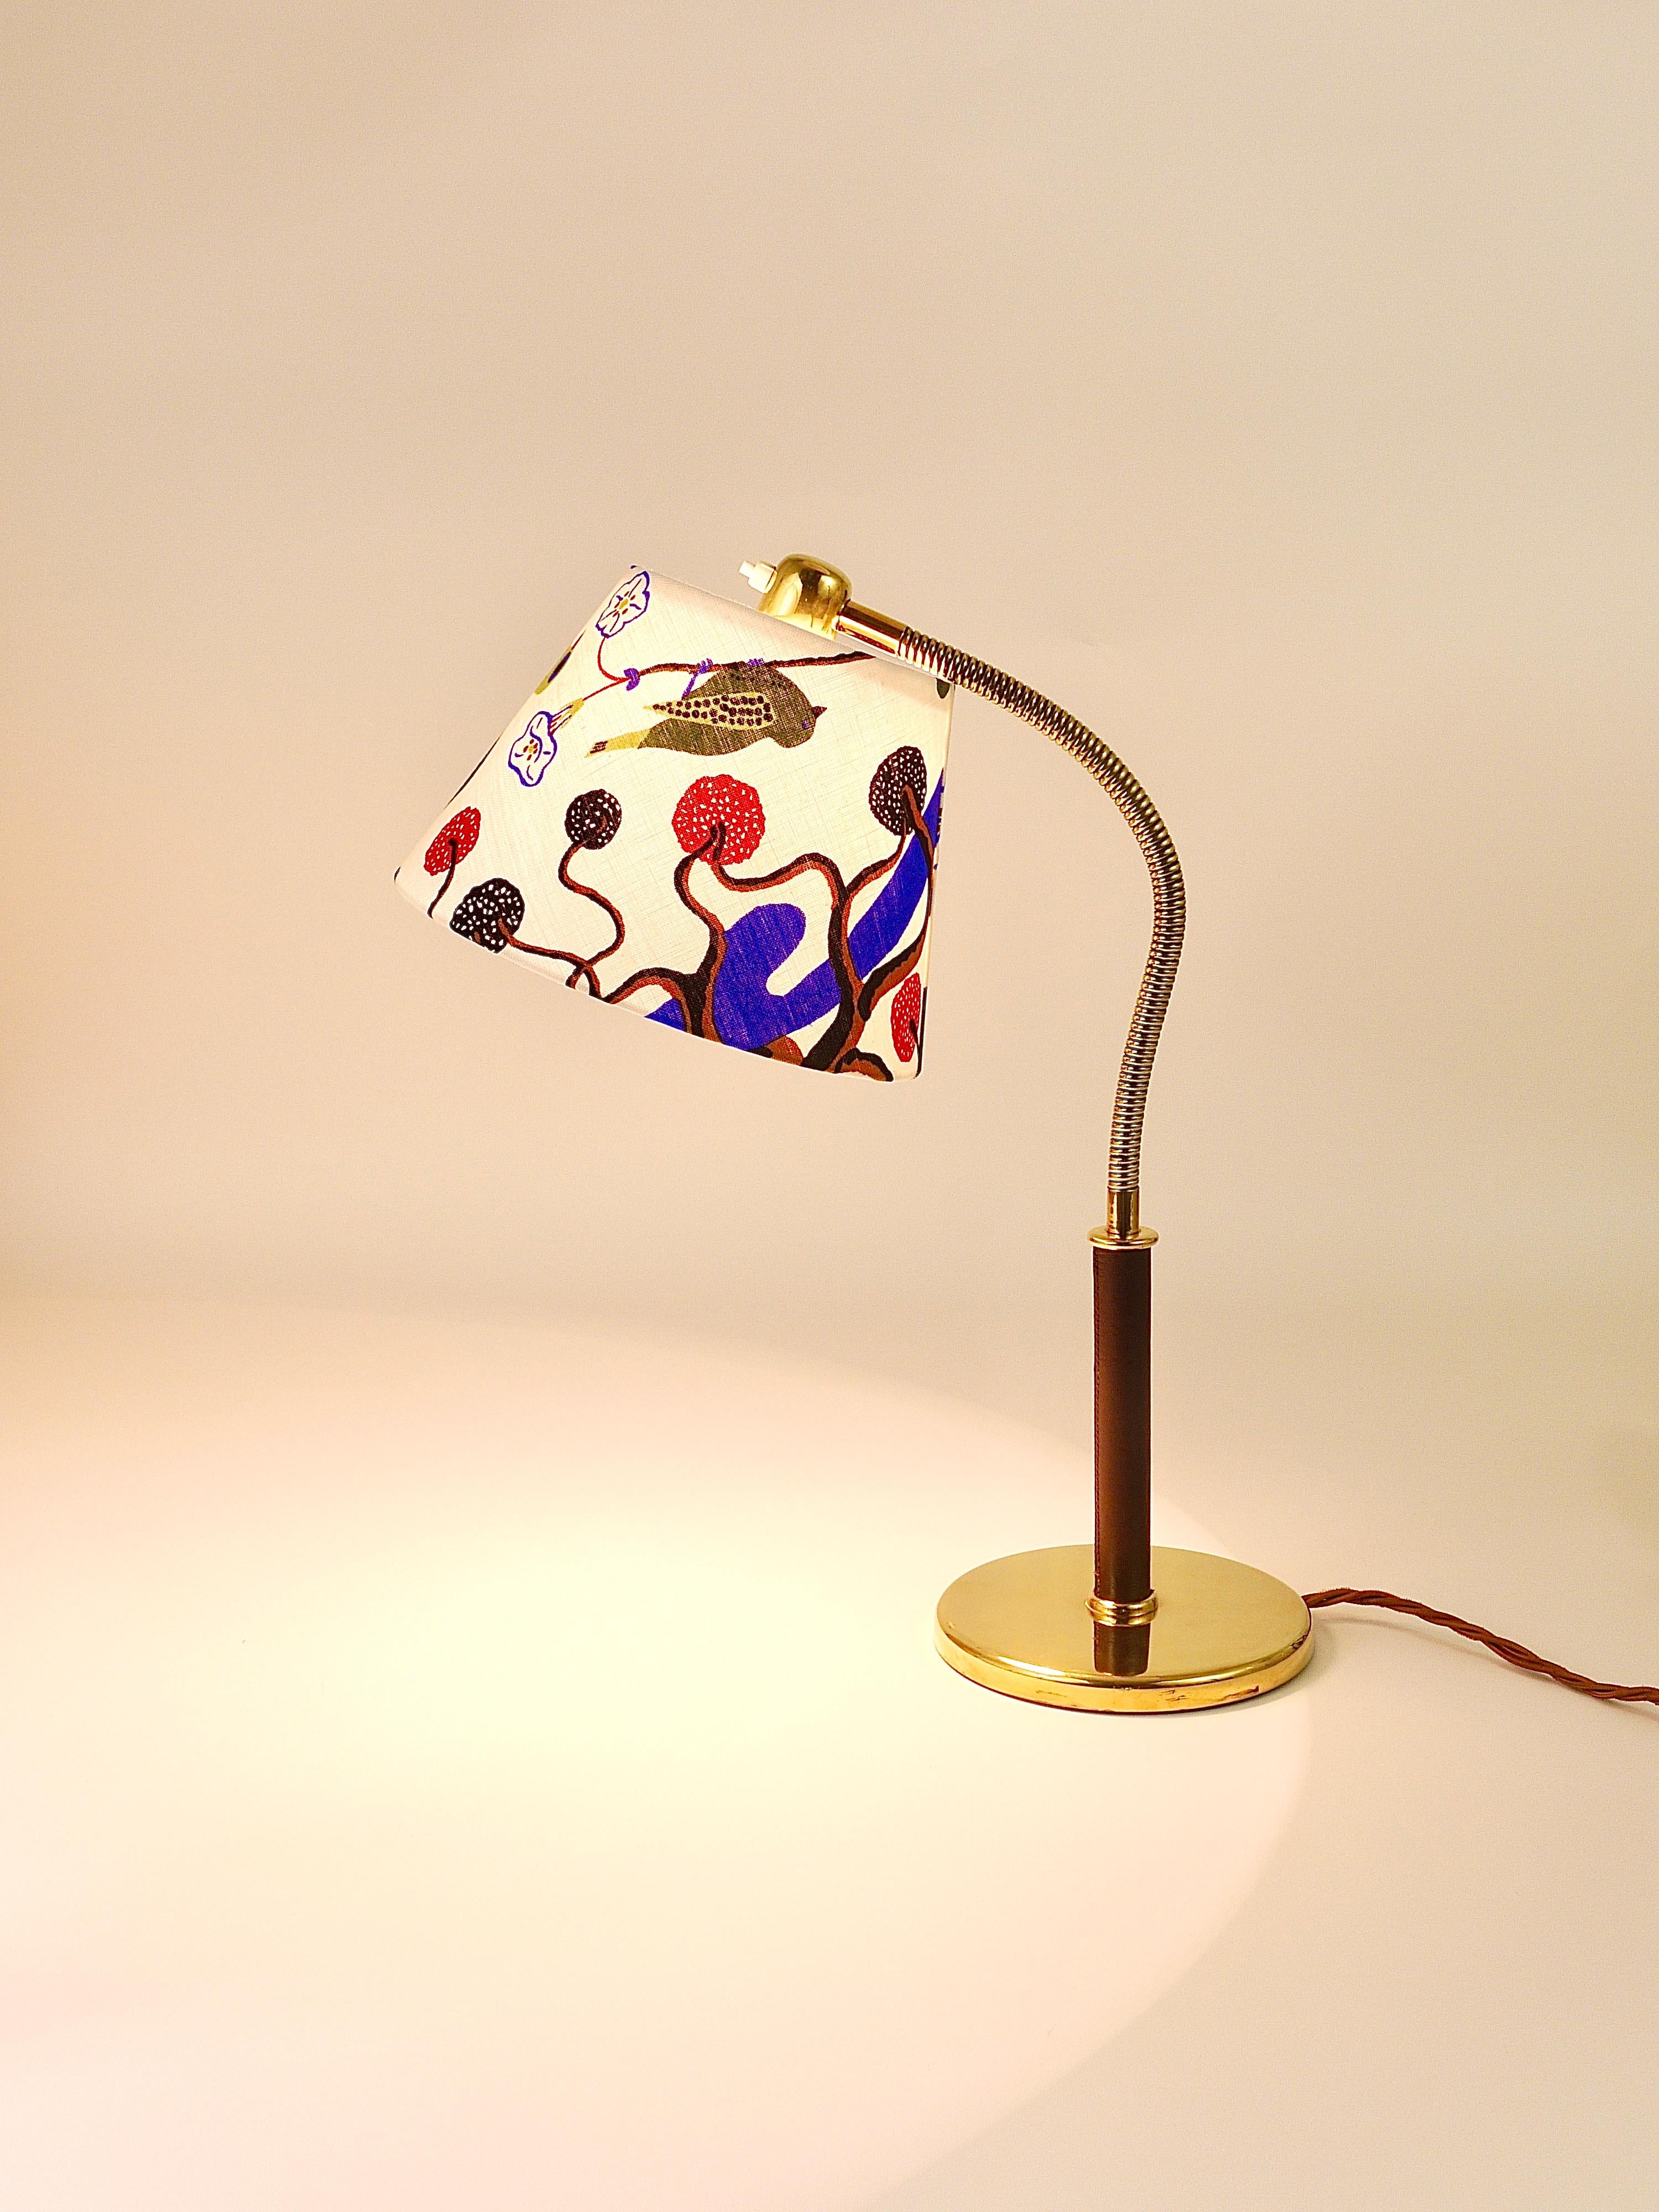 A wonderful Viennese Modernism  table or desk lamp form the 1930s, designed by Josef Frank for Haus & Garten (Josef Frank und Oskar Wlach) in 1934. The model is called „ Tisch Überall“ and has the no. 1092. Manufactured by J.T. Kalmar in Vienna,